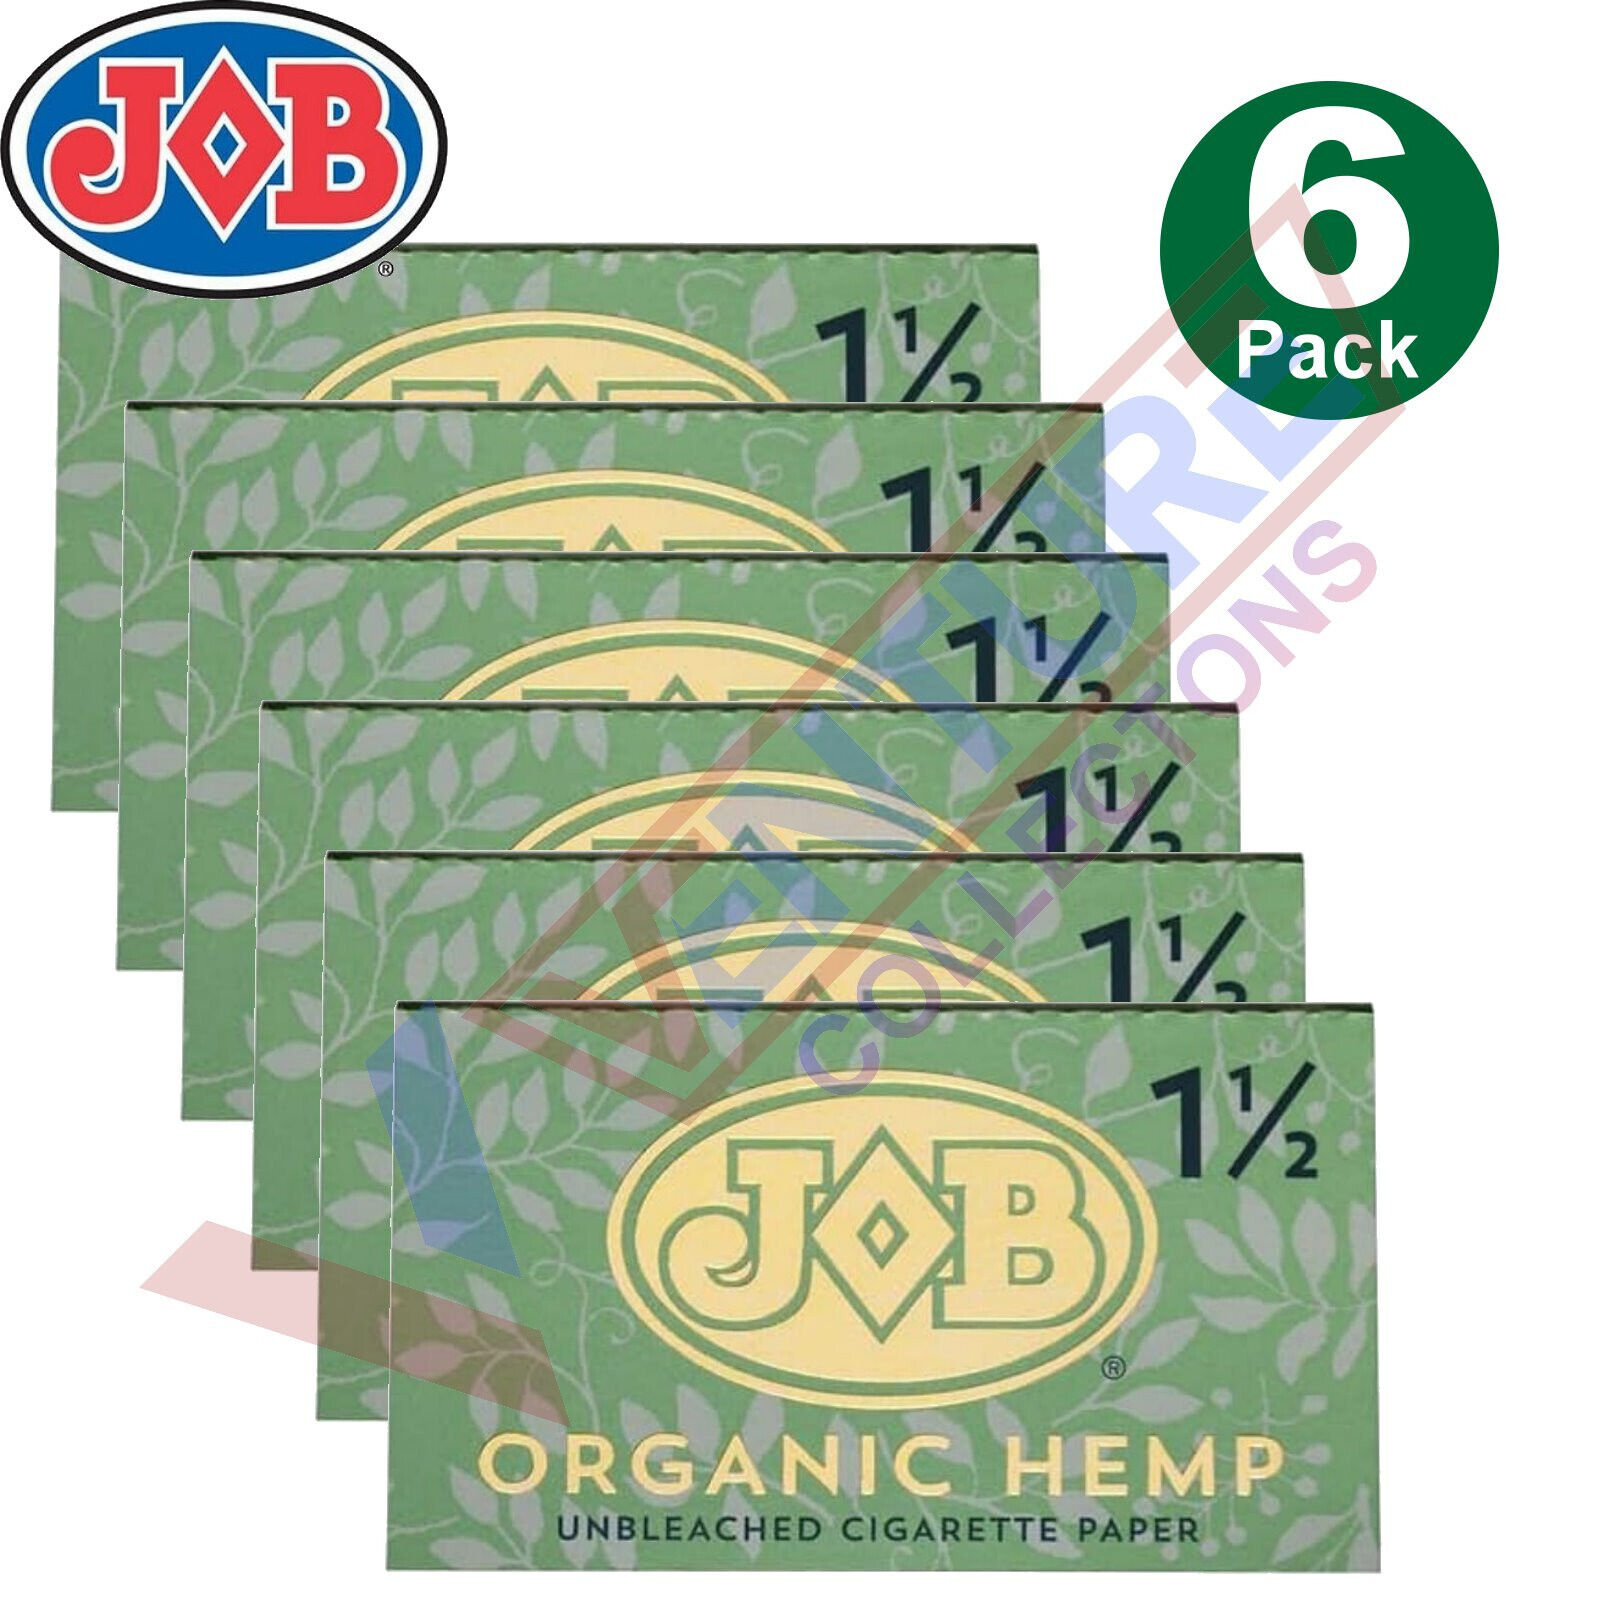 JOB Organic 1 1/2 1.5 Unbleached Rolling Papers 6 Booklet (24 Paper Each)